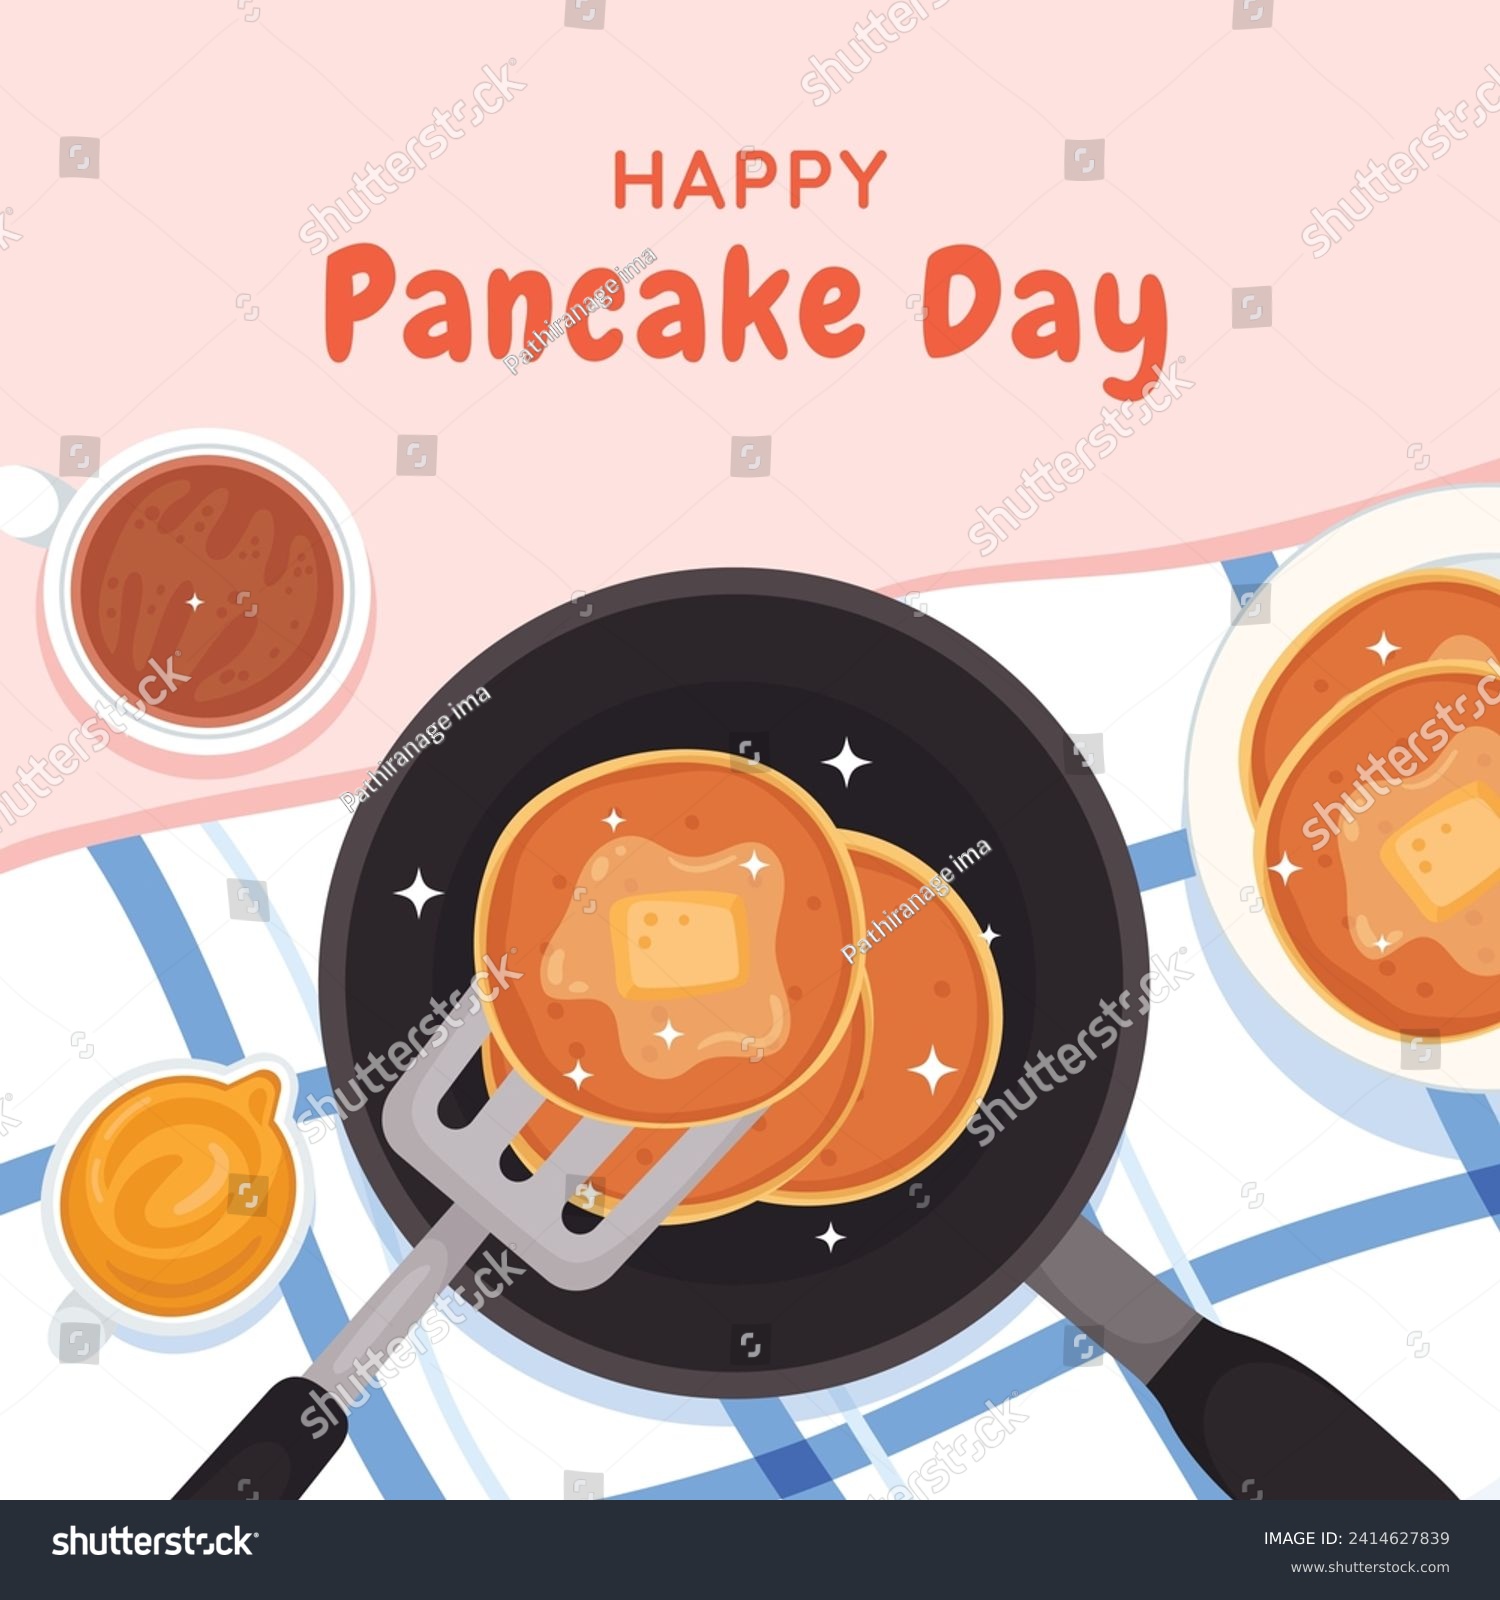 SVG of Happy pancake day. pancake day background. National Pancake Day. Cartoon Vector illustration design Template for Poster, Banner, Flyer, Card, Post, Cover. Pancakes stack with berries or honey. svg